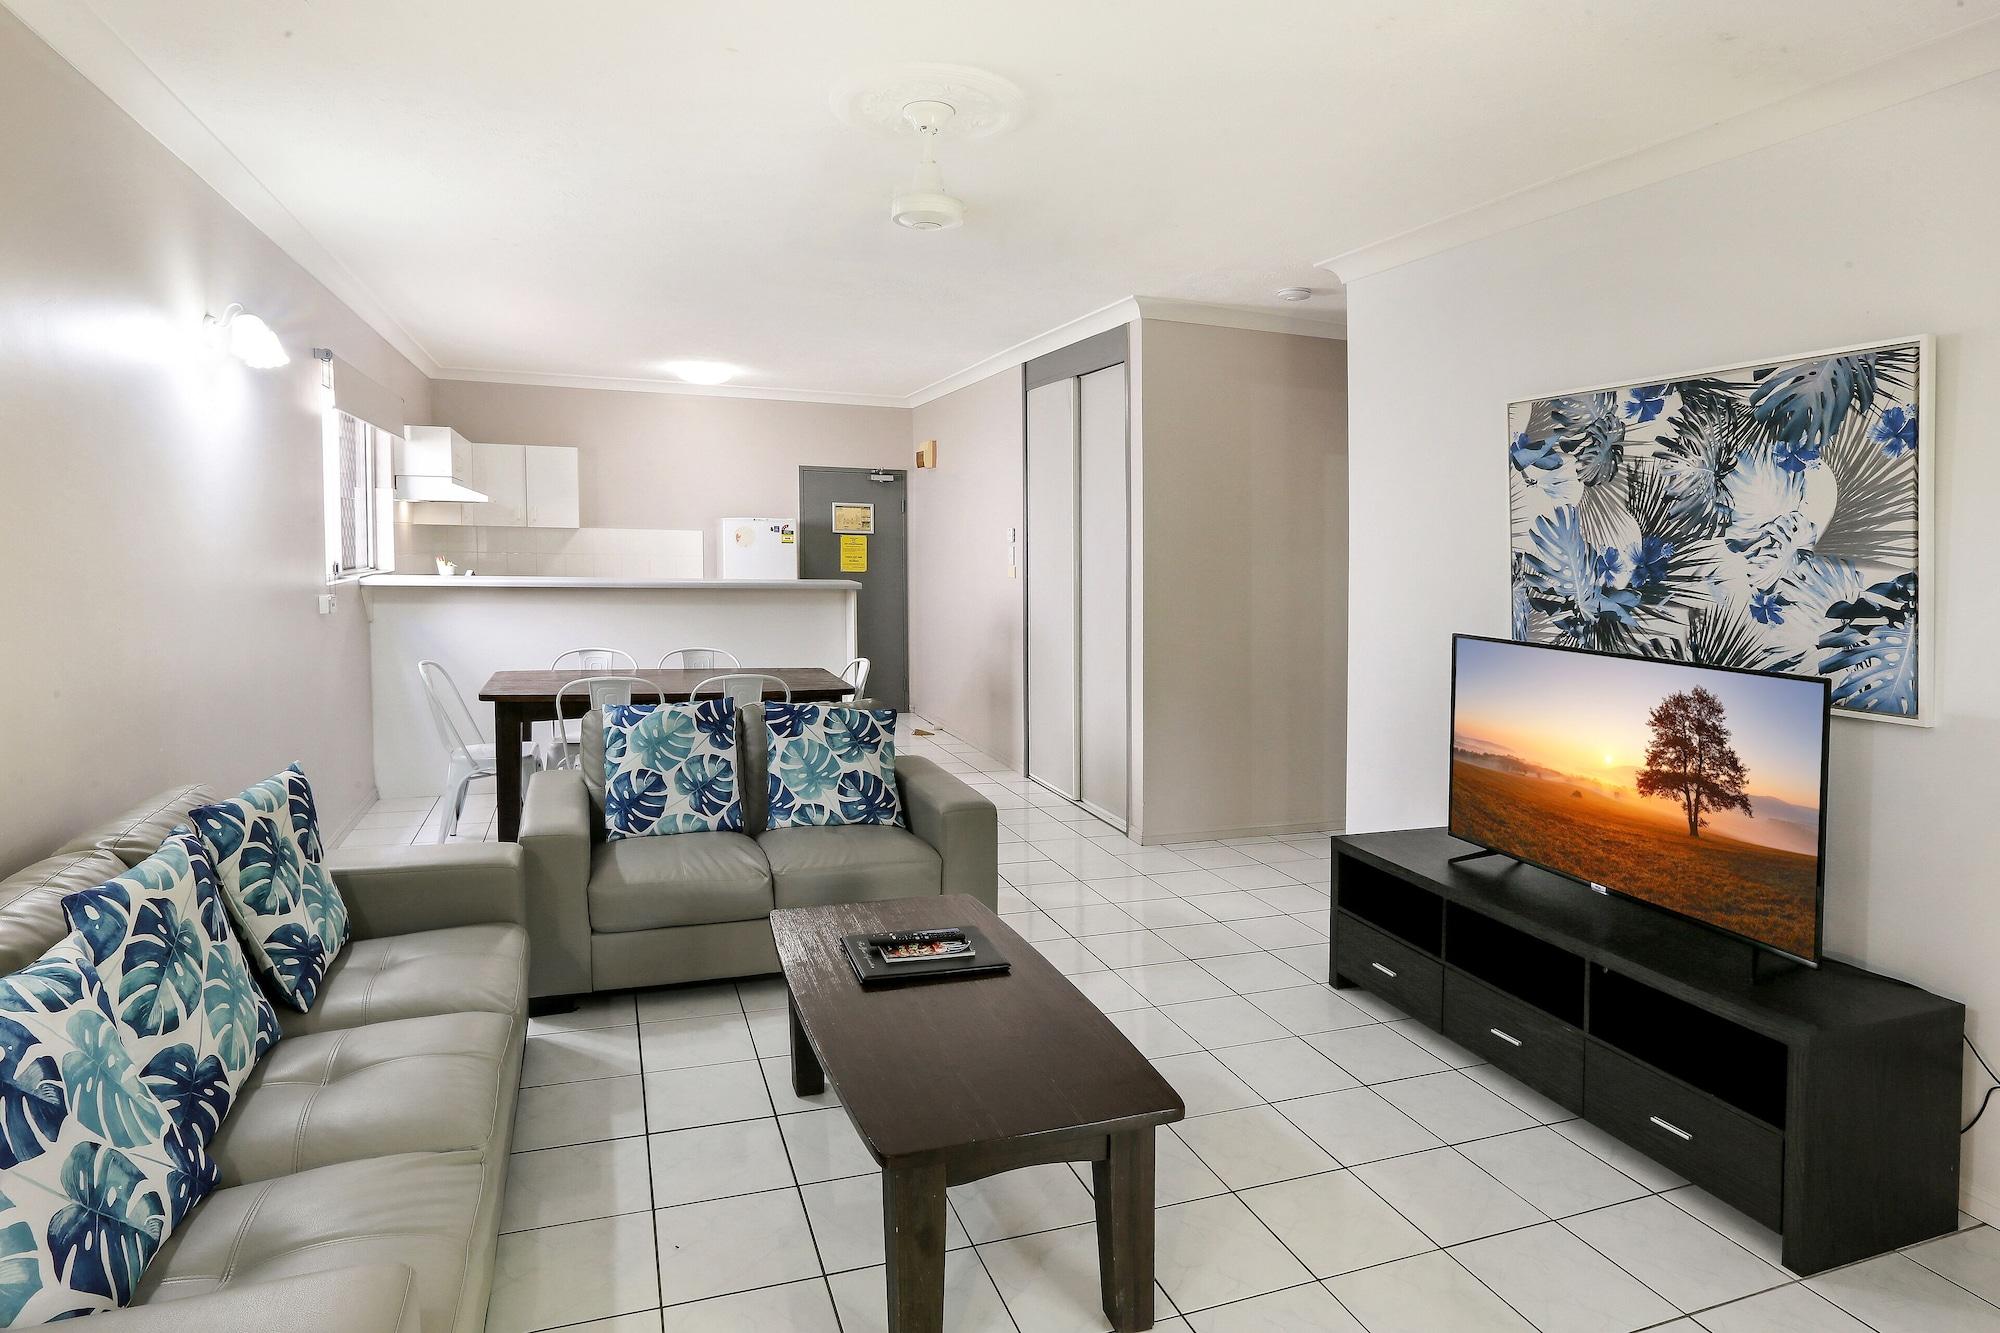 Citysider Cairns Holiday Apartments Bagian luar foto